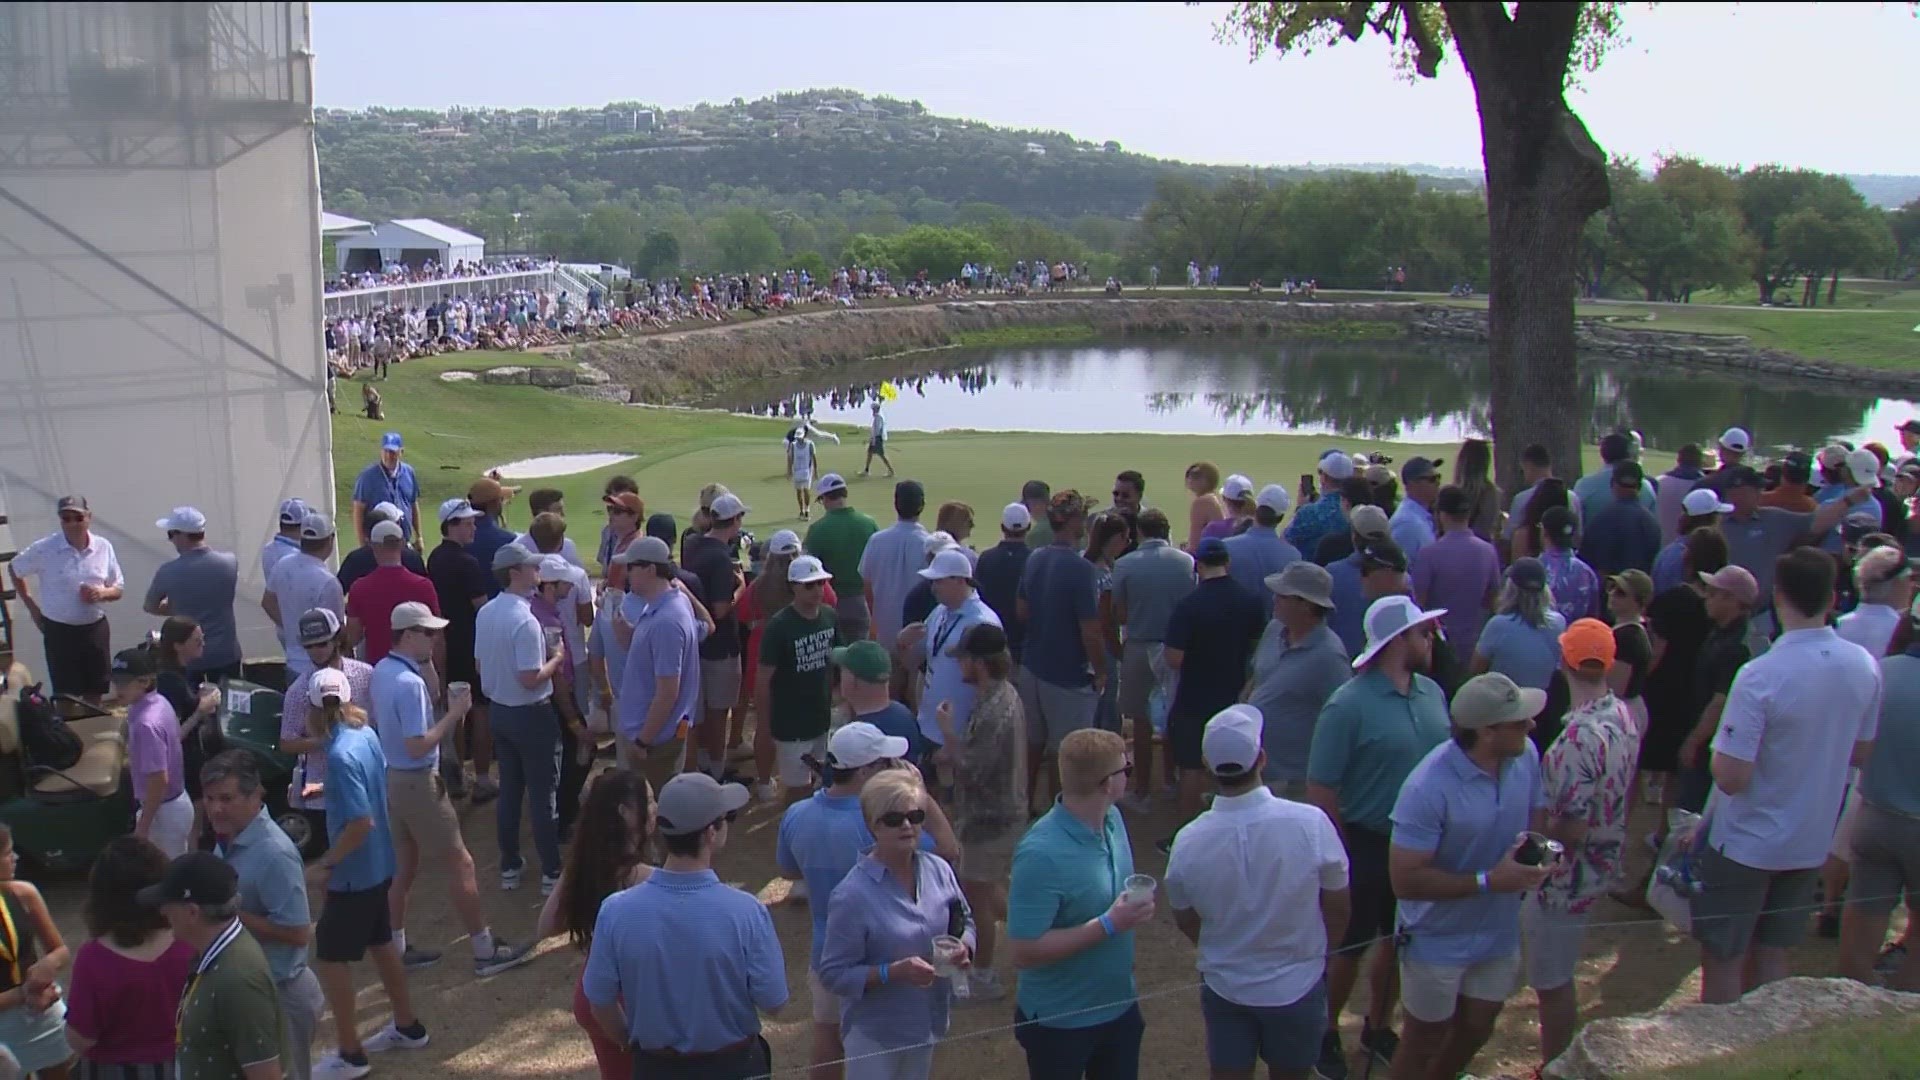 Sunday was the last day of Dell Match Play and the last time the tournament will be held in Austin.